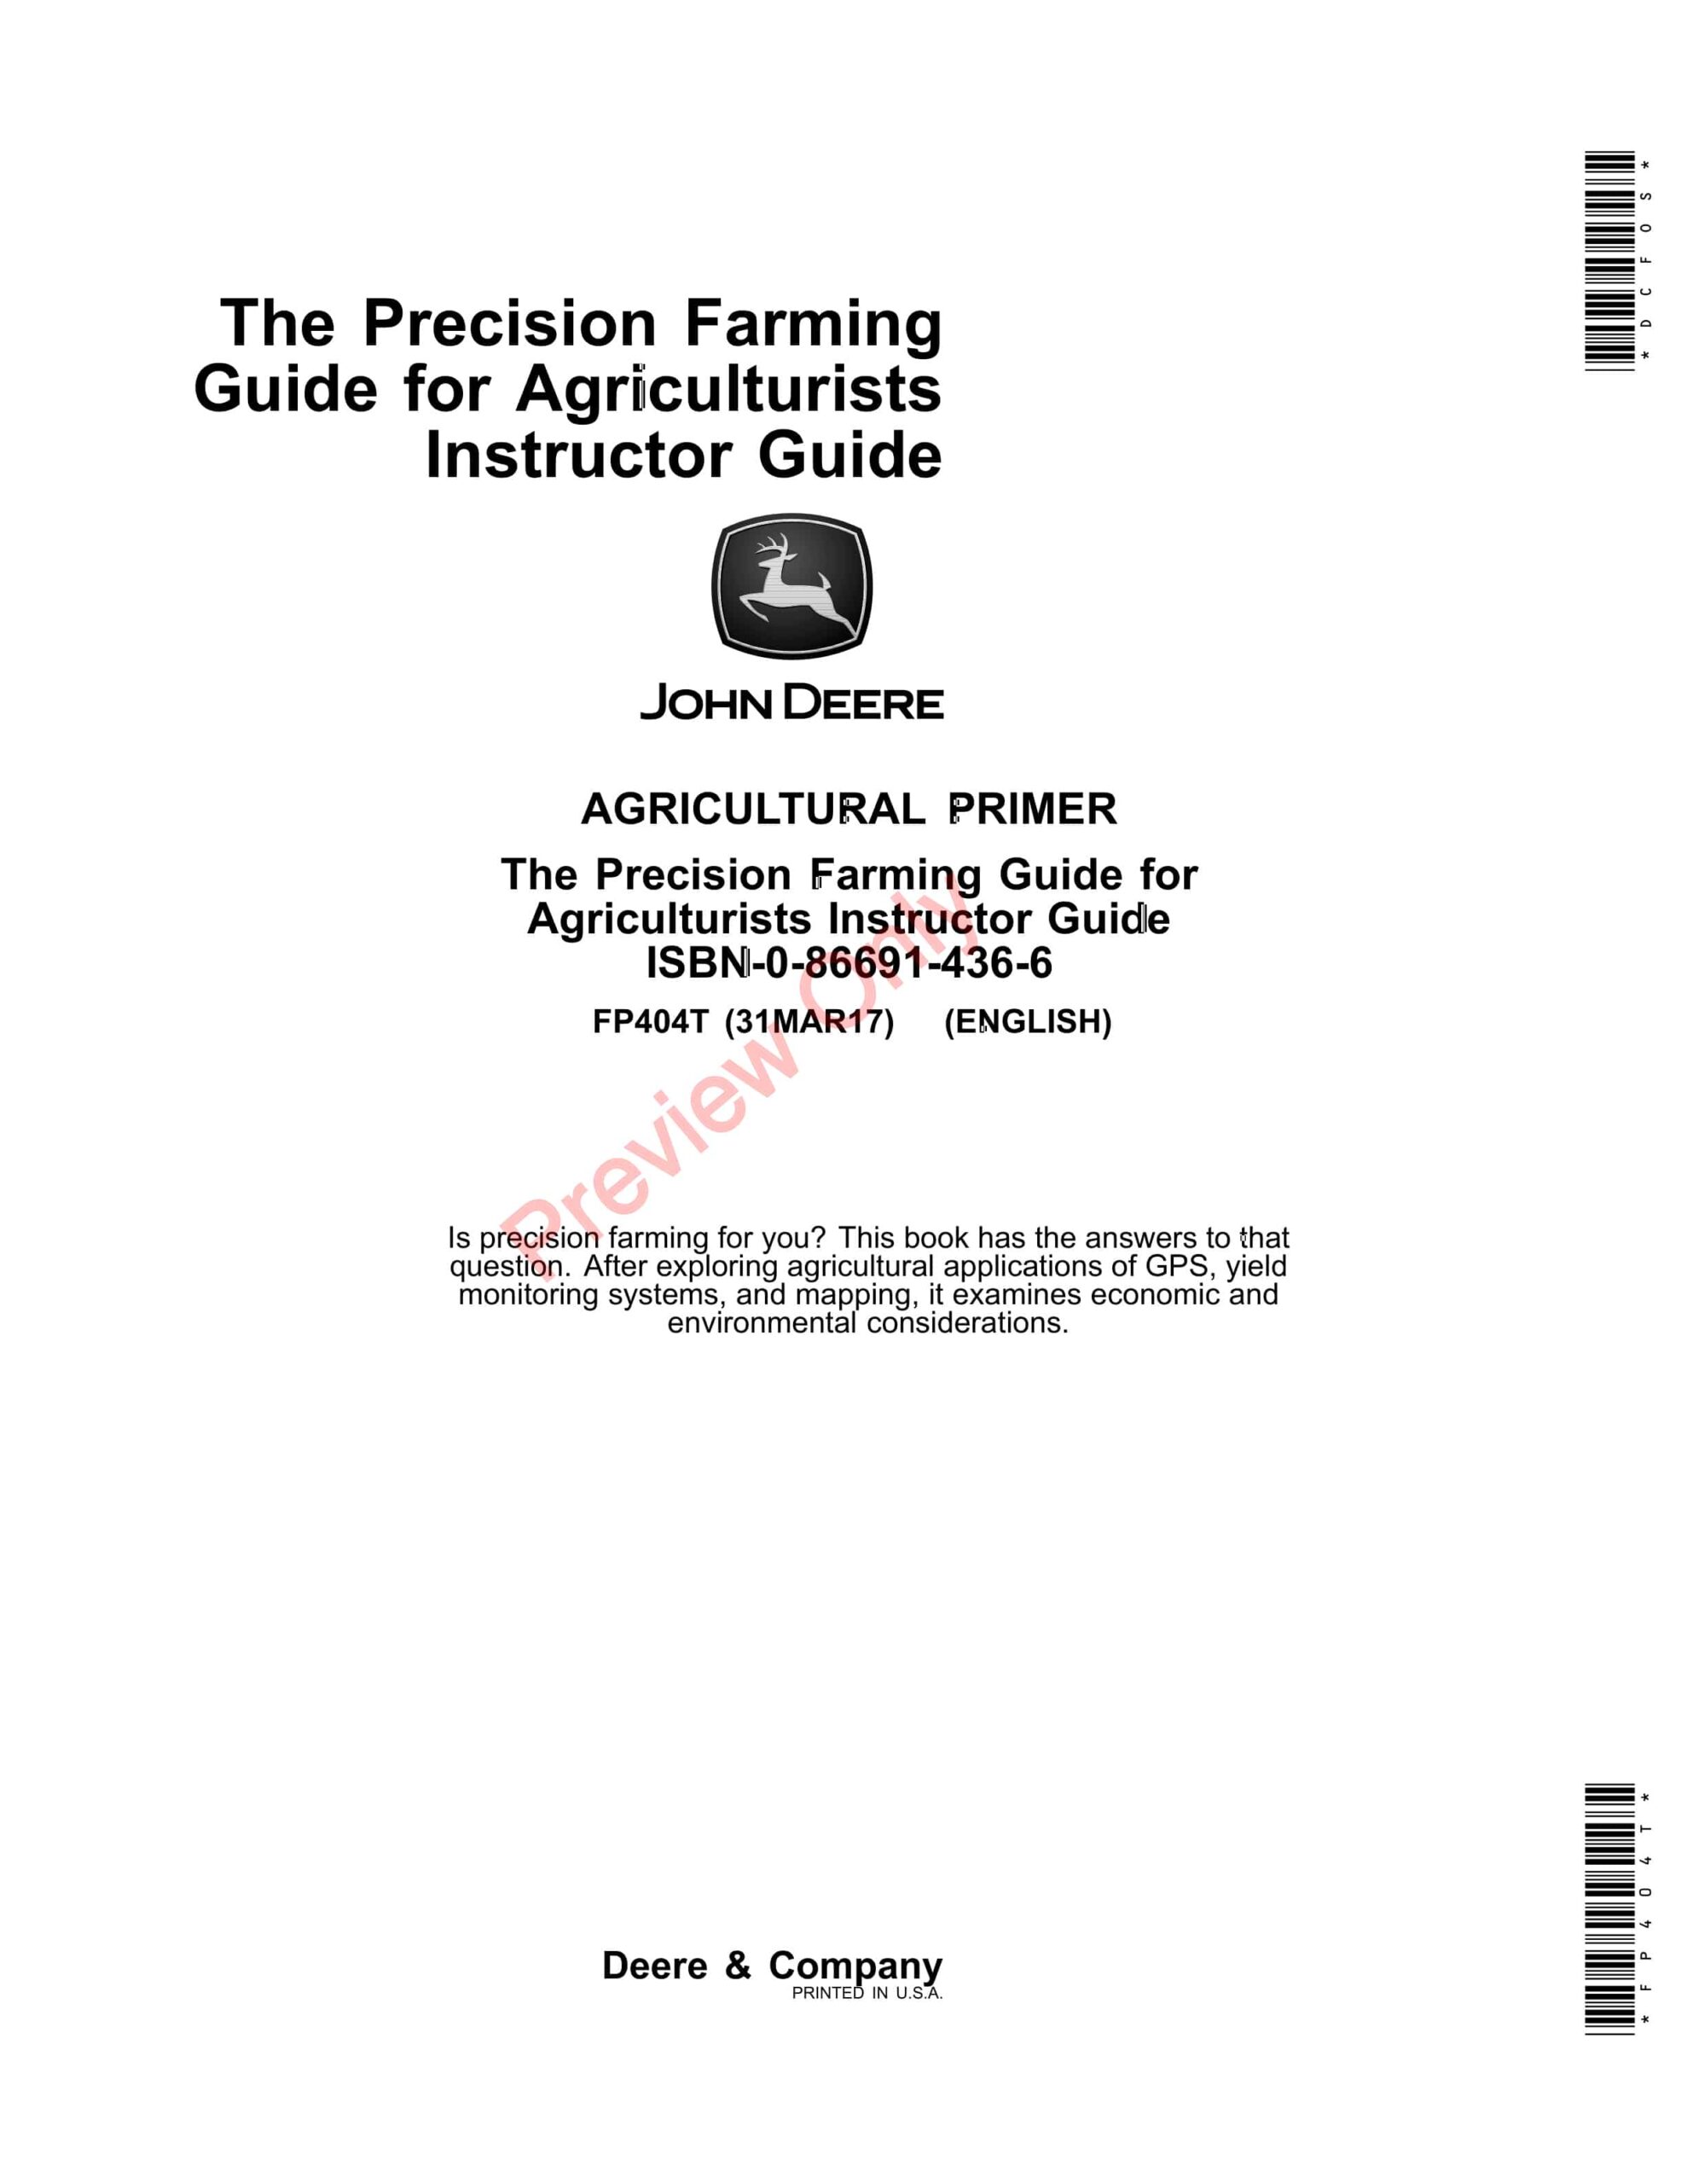 John Deere FOSFMO The Precision Farming Guide for Agriculturists Agricultural Primer FP404T 31MAR17-1